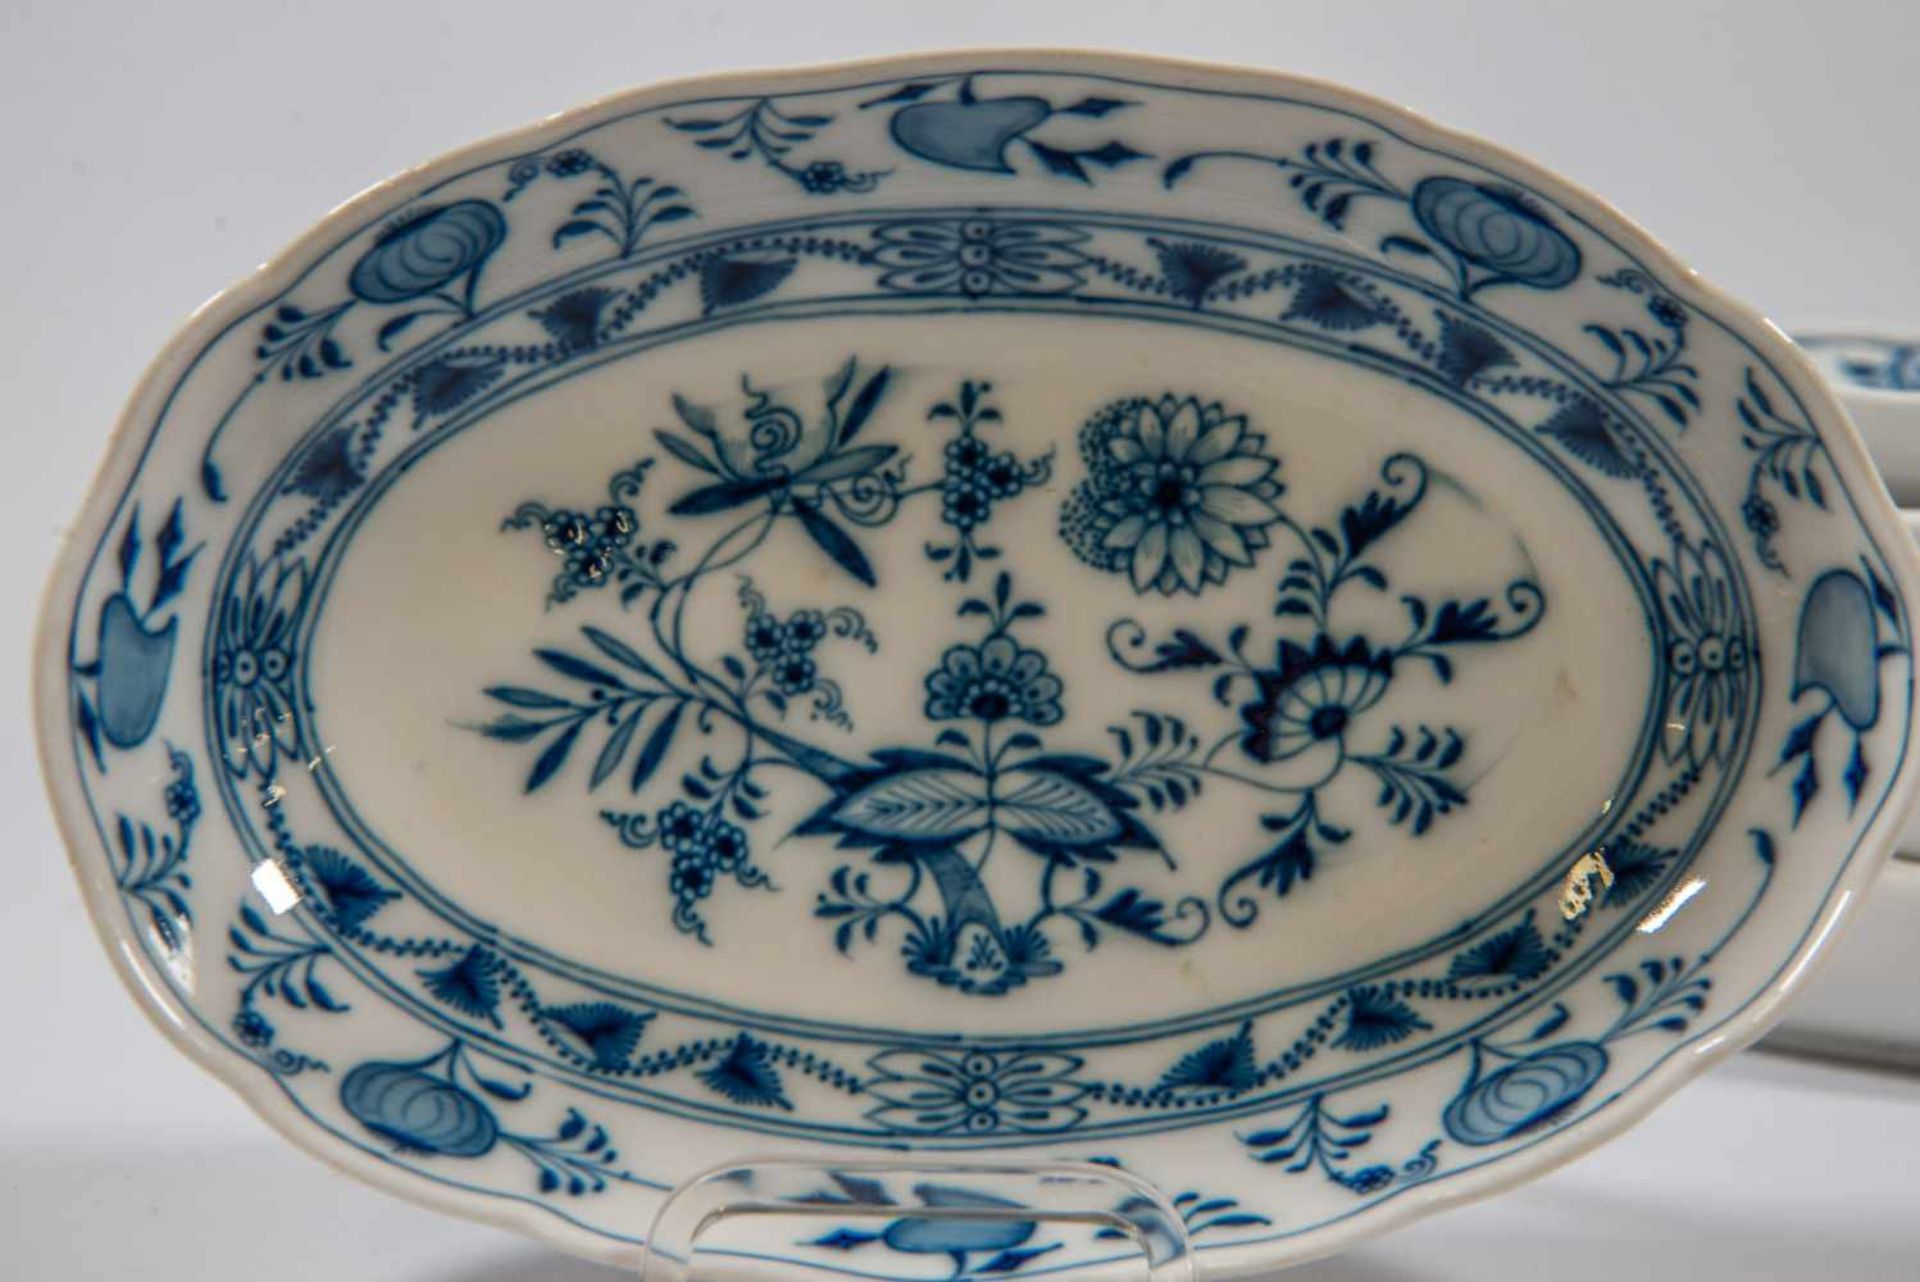 Assembled collection of 6 Meissen Porcelain Oval dish, marked with crossed swords, Meissen - Bild 4 aus 7